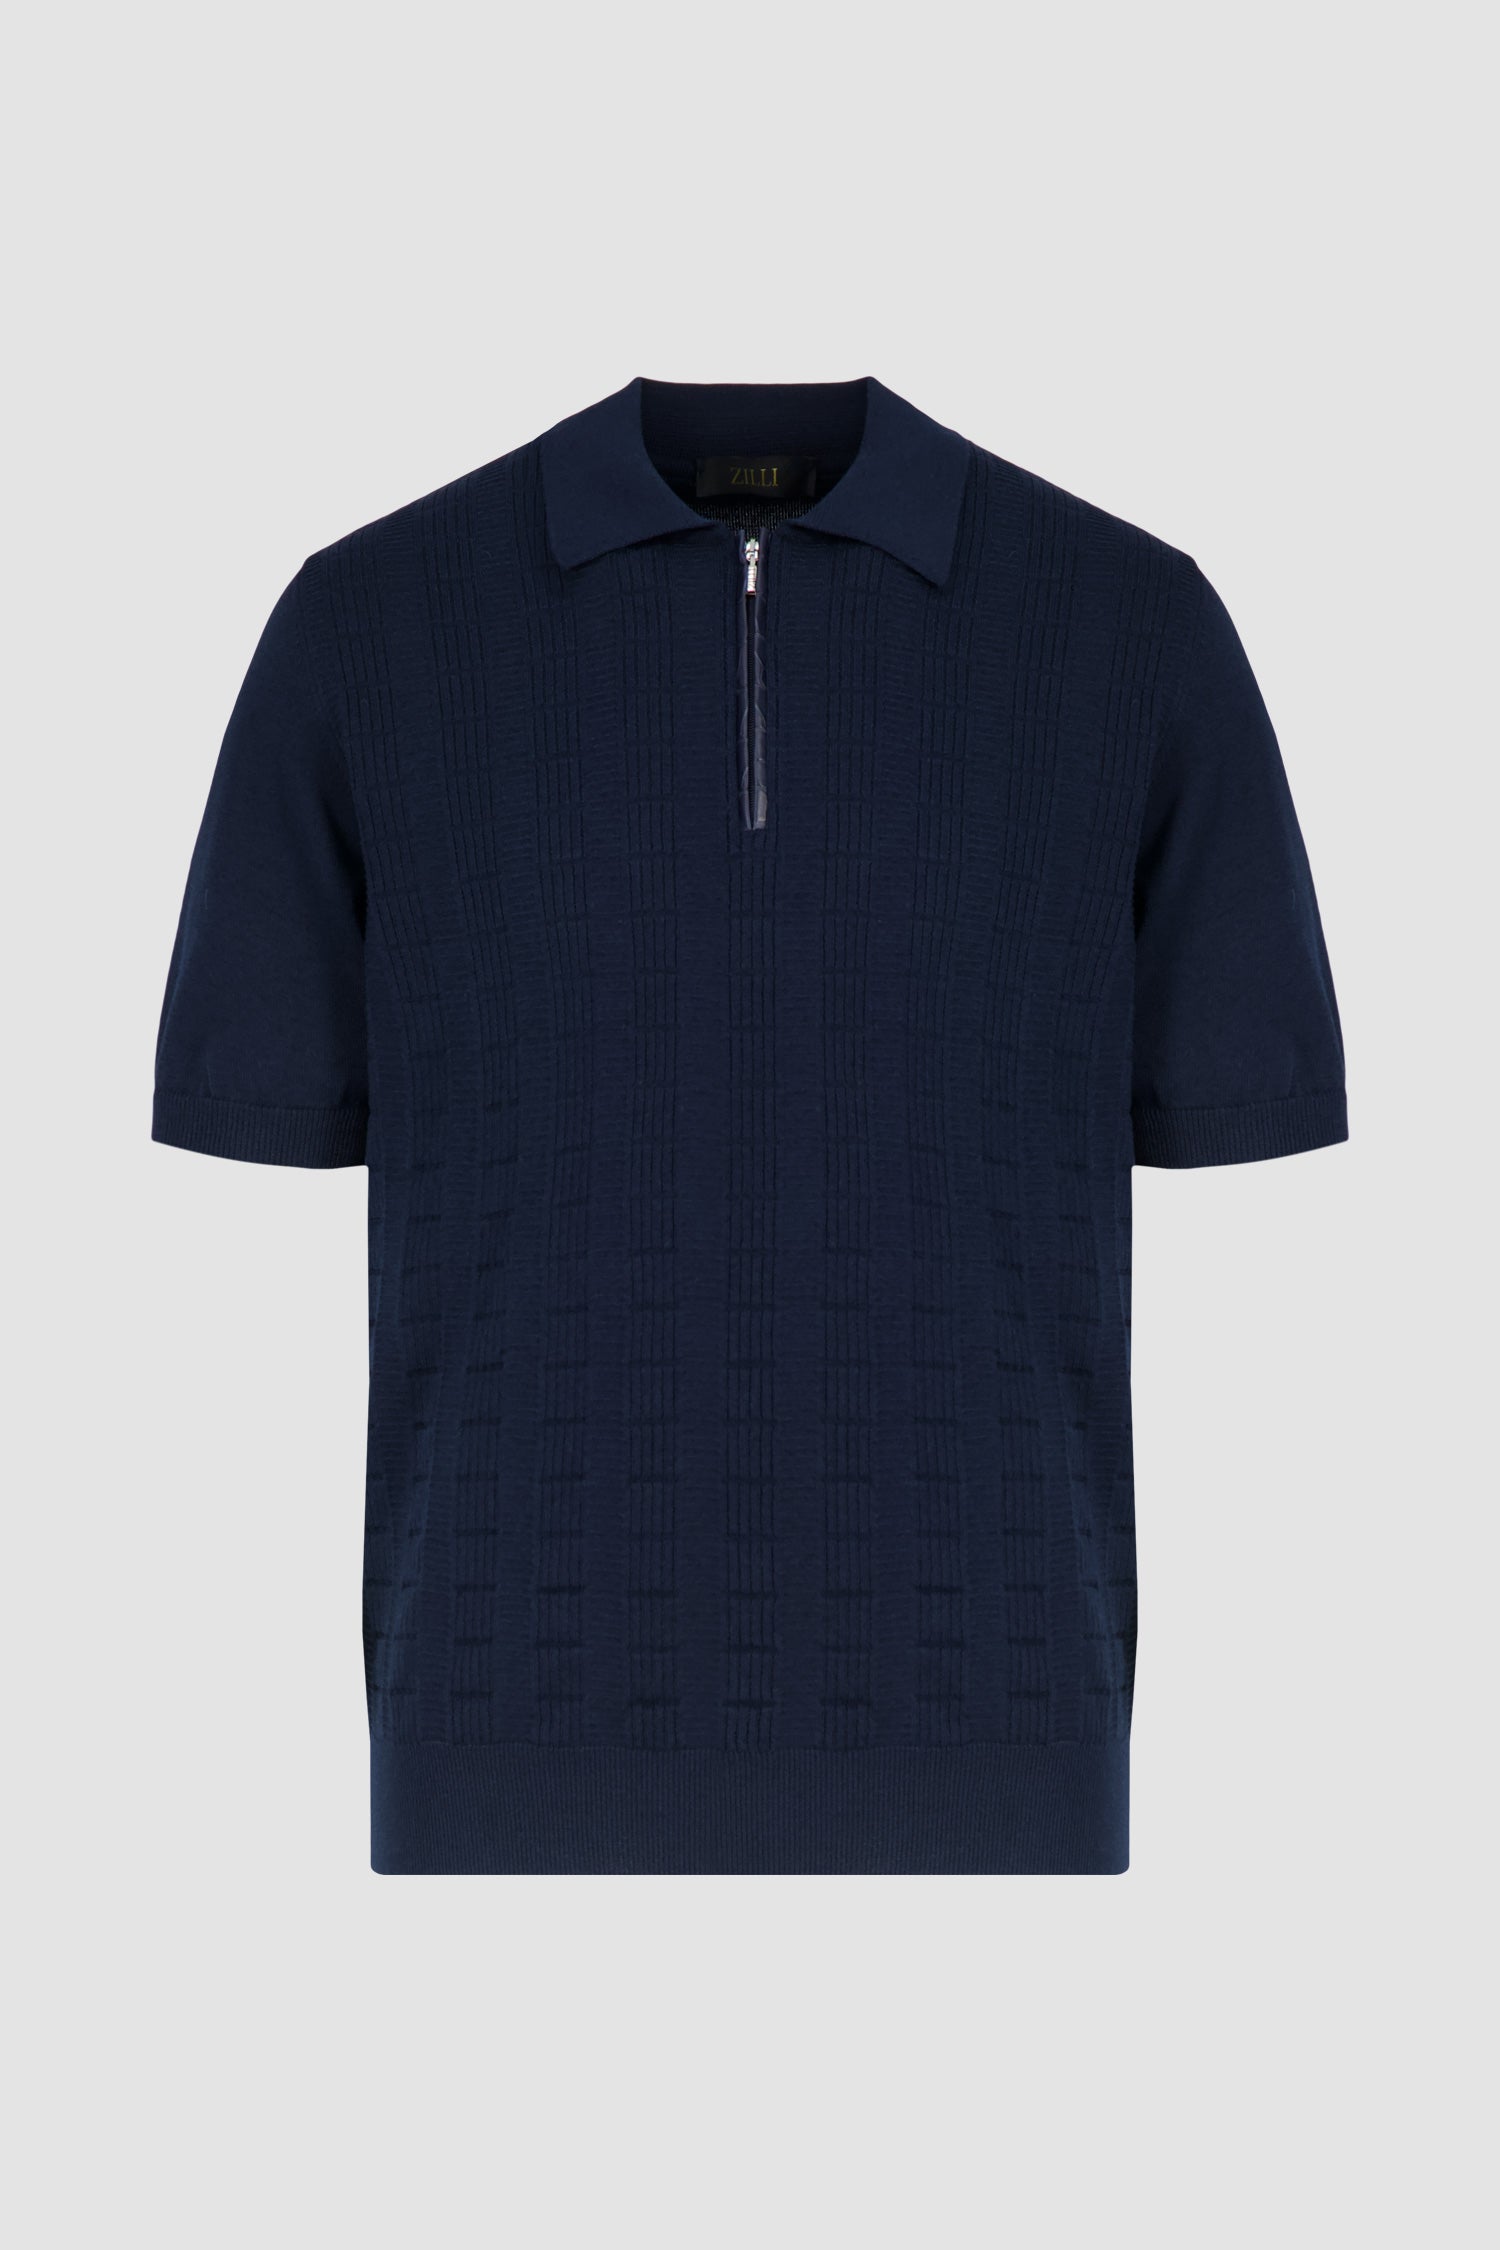 Zilli Navy Zip Short Sleeves Polo with Croc